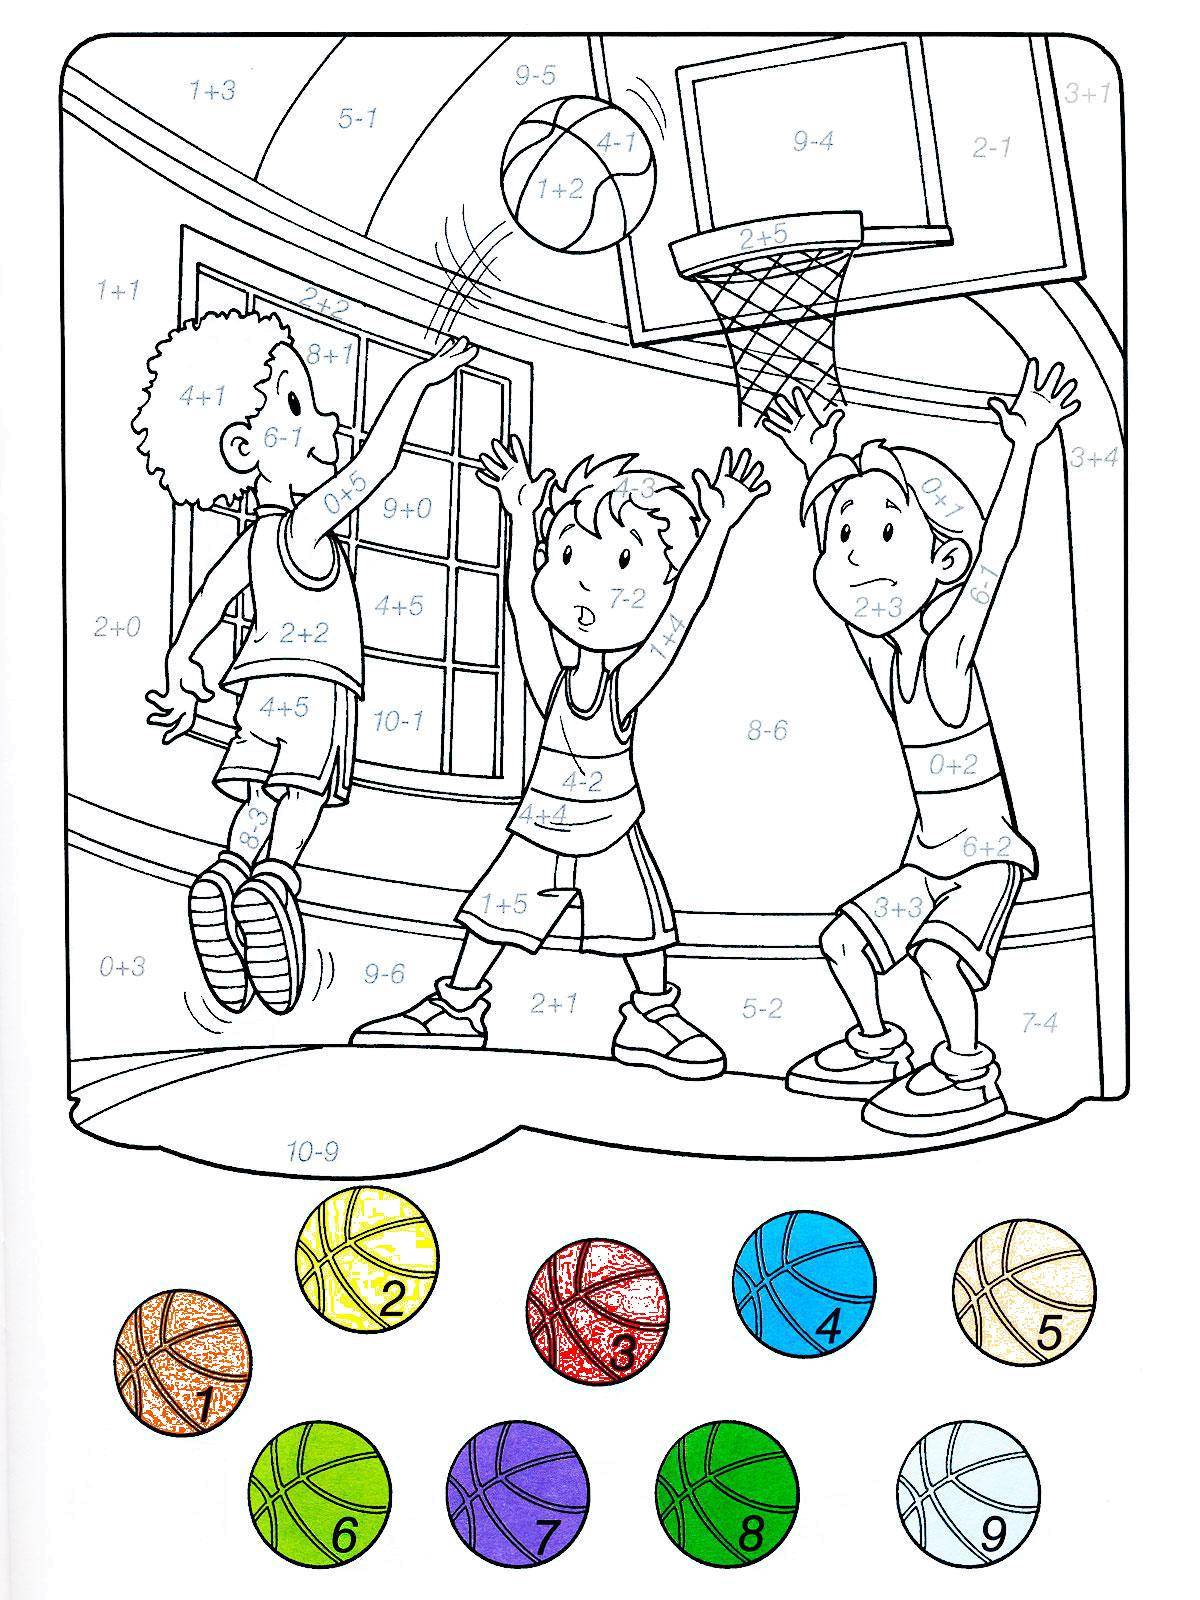 Coloring Paint basketball players deciding examples. Category mathematical coloring pages. Tags:  sports, basketball, children, game, examples.